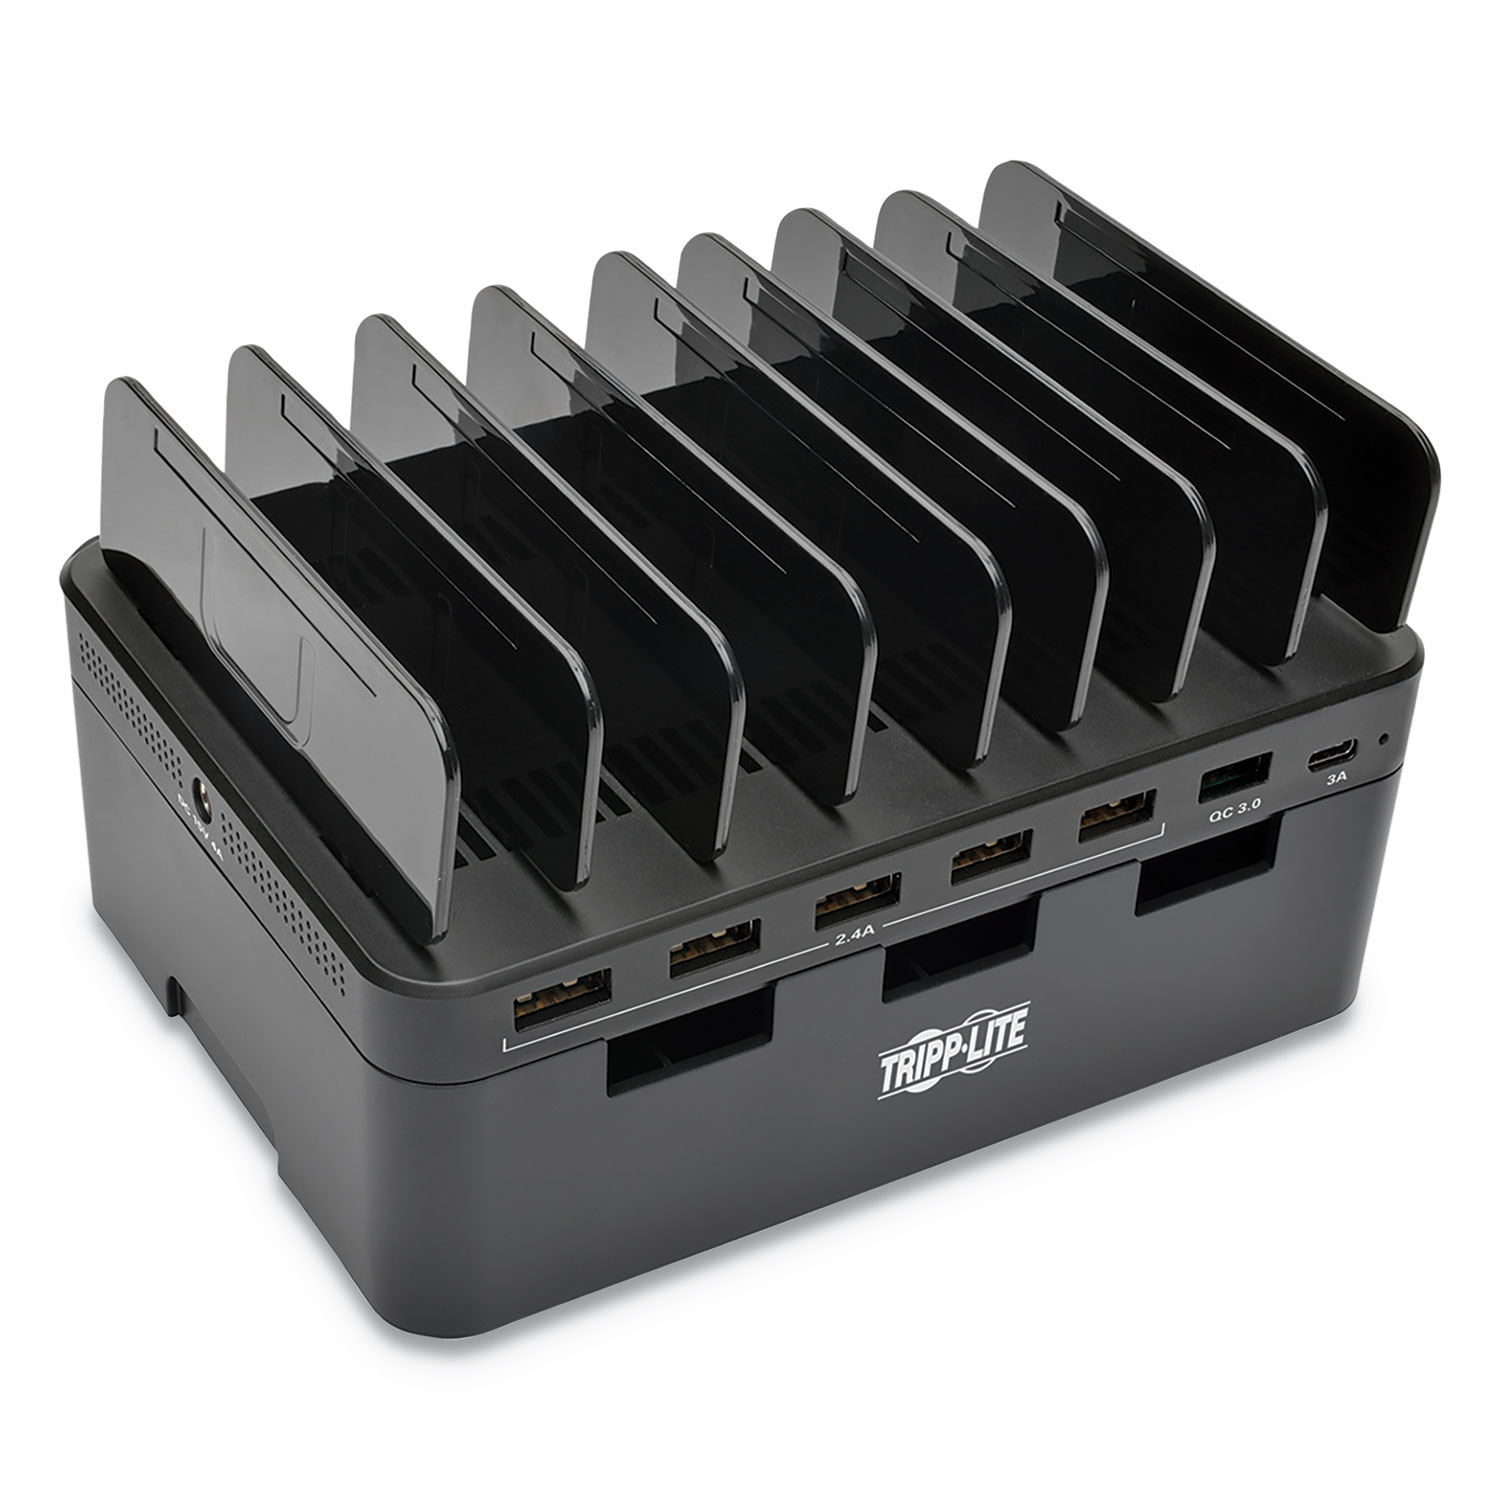  Tripp Lite U280-007-CQC-ST USB Charging Station with Quick Charge 3.0, Holds 7 Devices, Black (TRPU280007CQCST) 